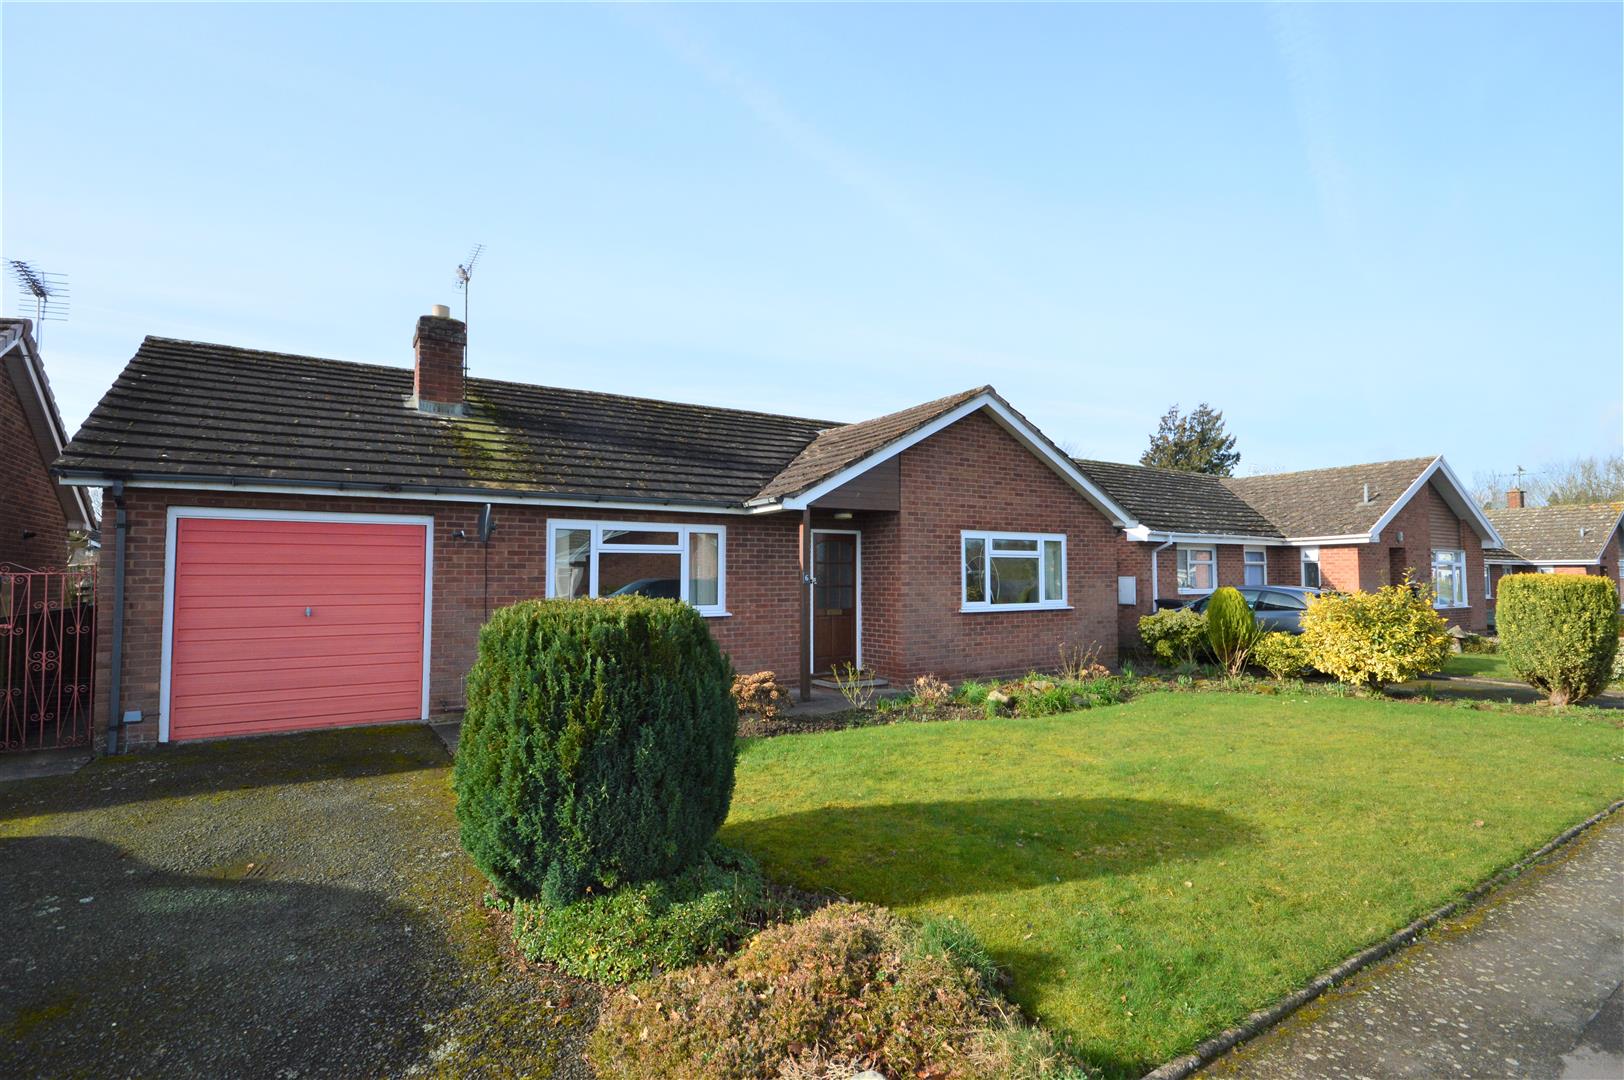 3 bed detached bungalow for sale in Lyonshall, HR5